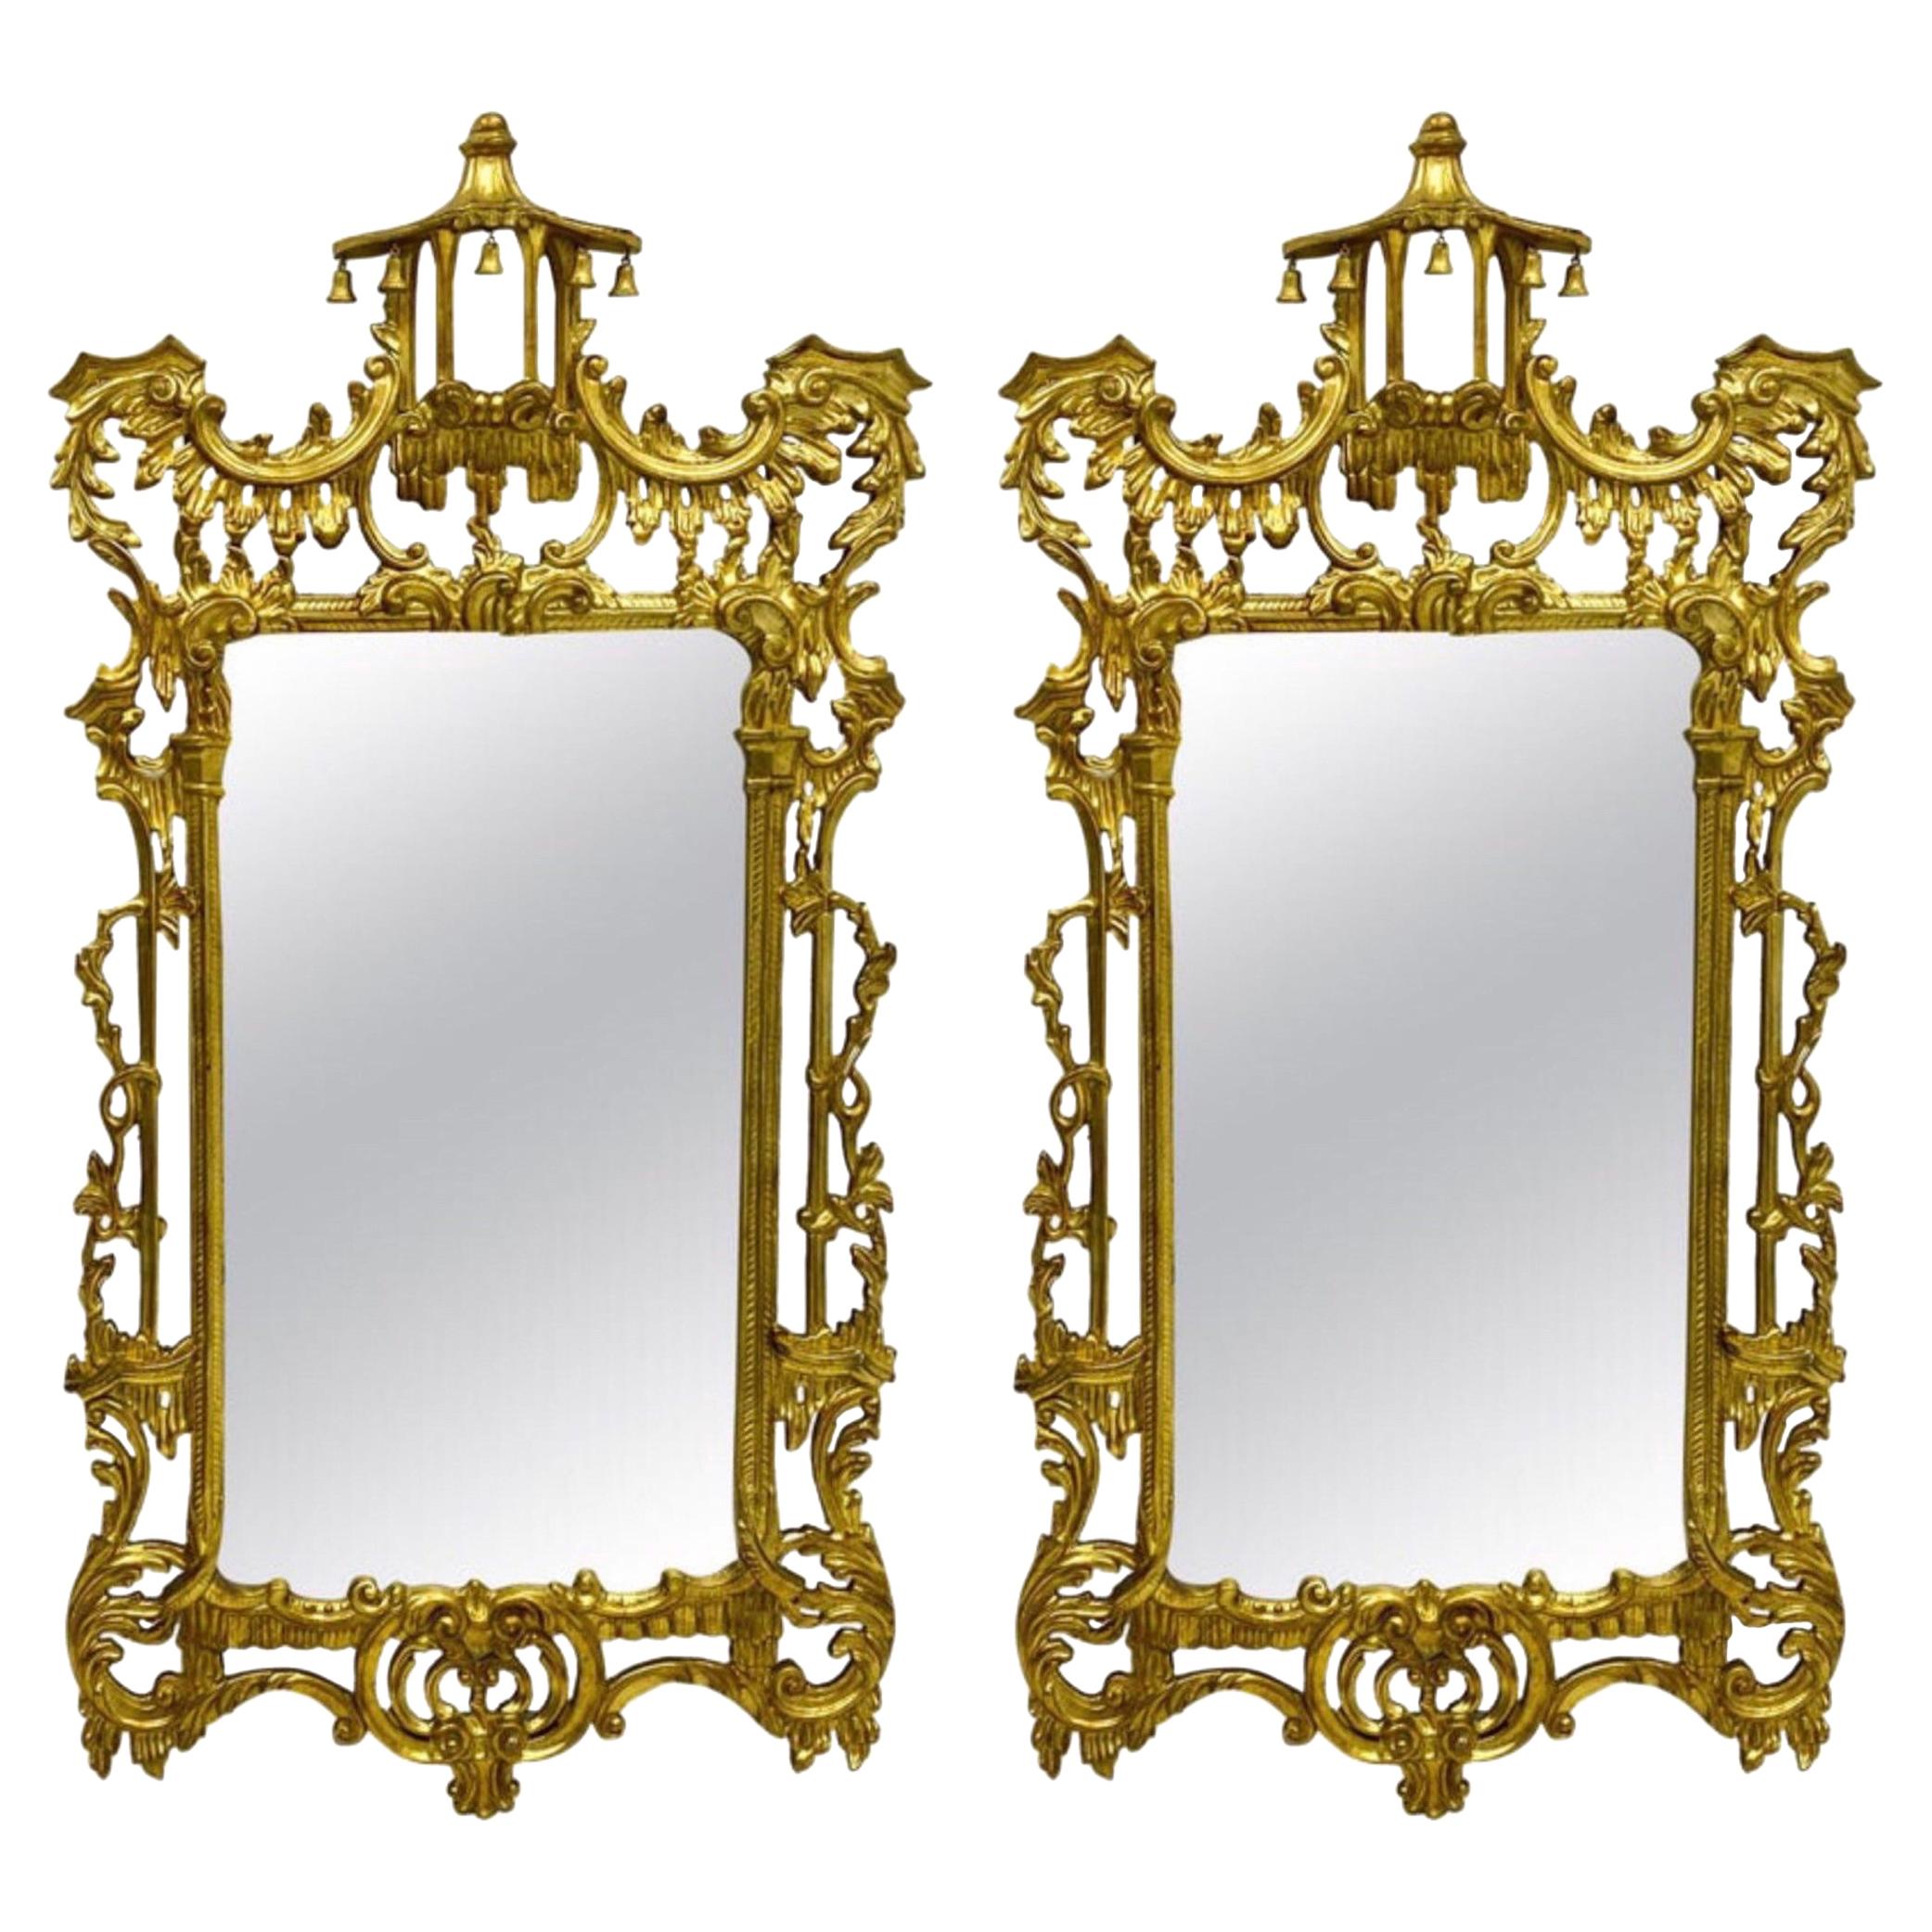 Italian Chinese Chippendale Style Giltwood Mirrors by Decorative Crafts, Pair